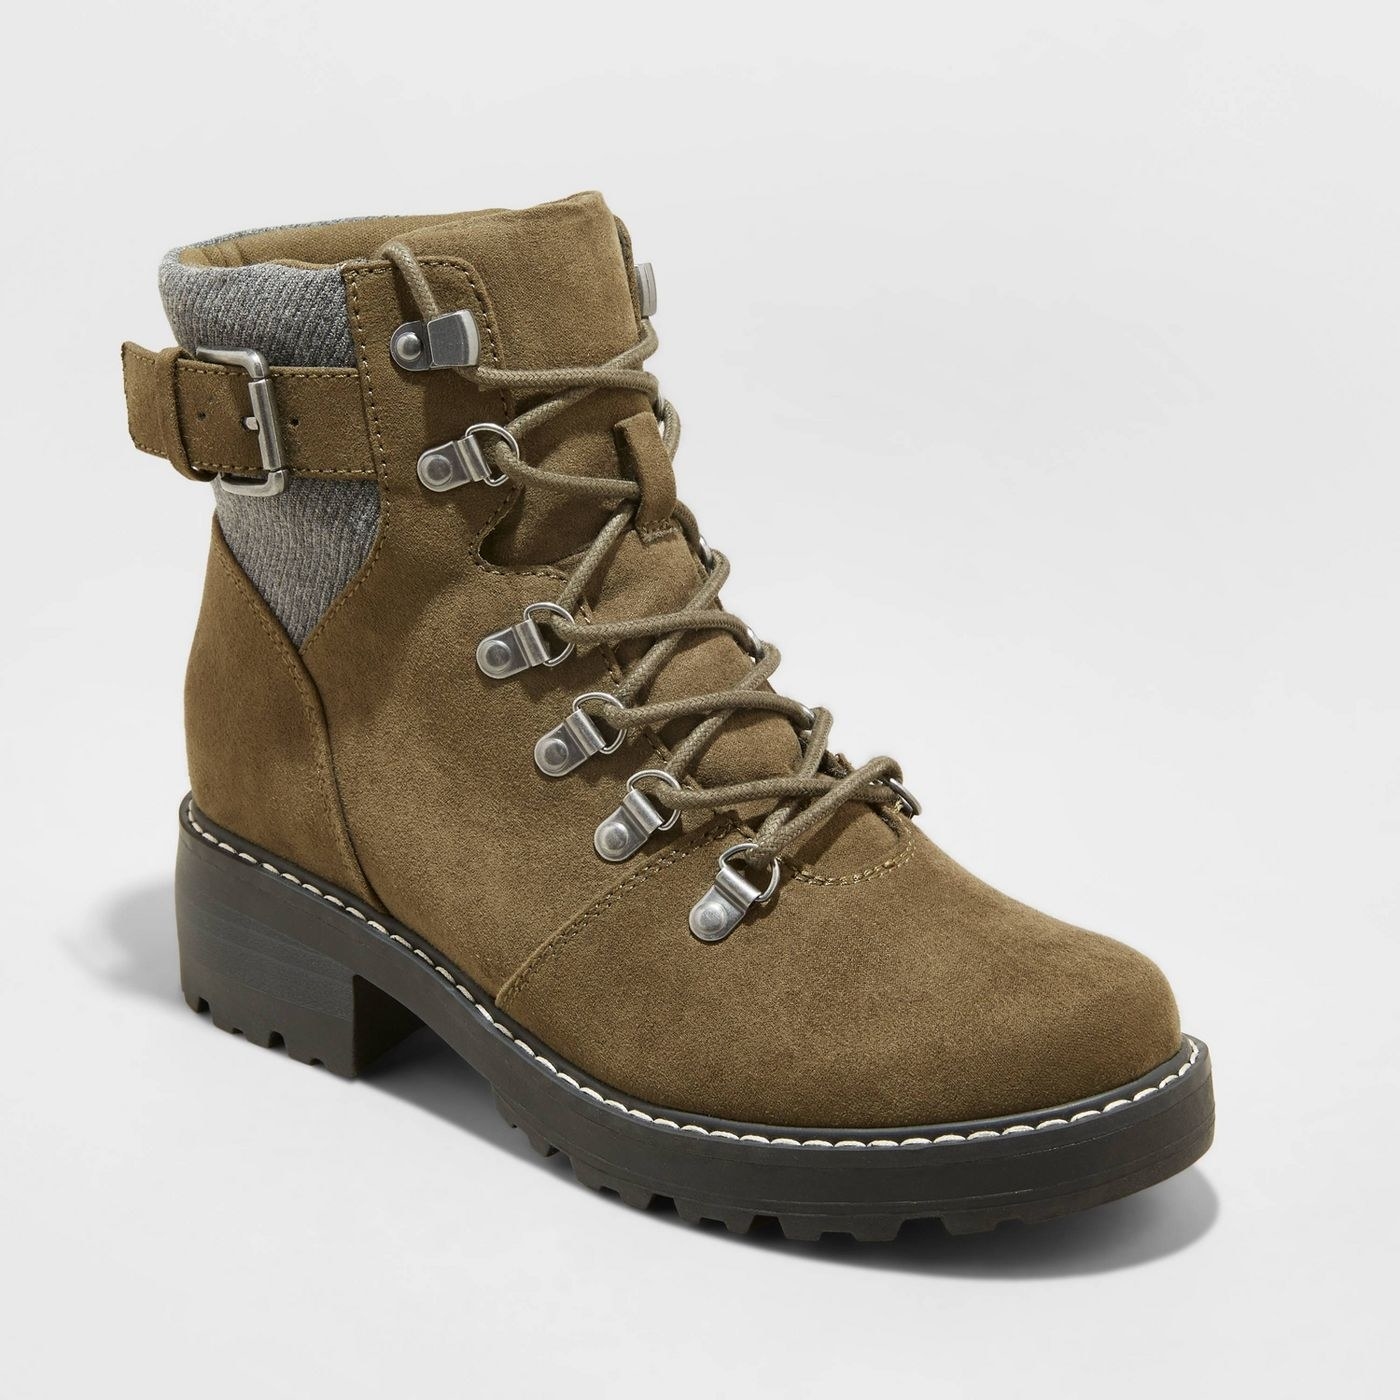 An olive green lace up hiking boot